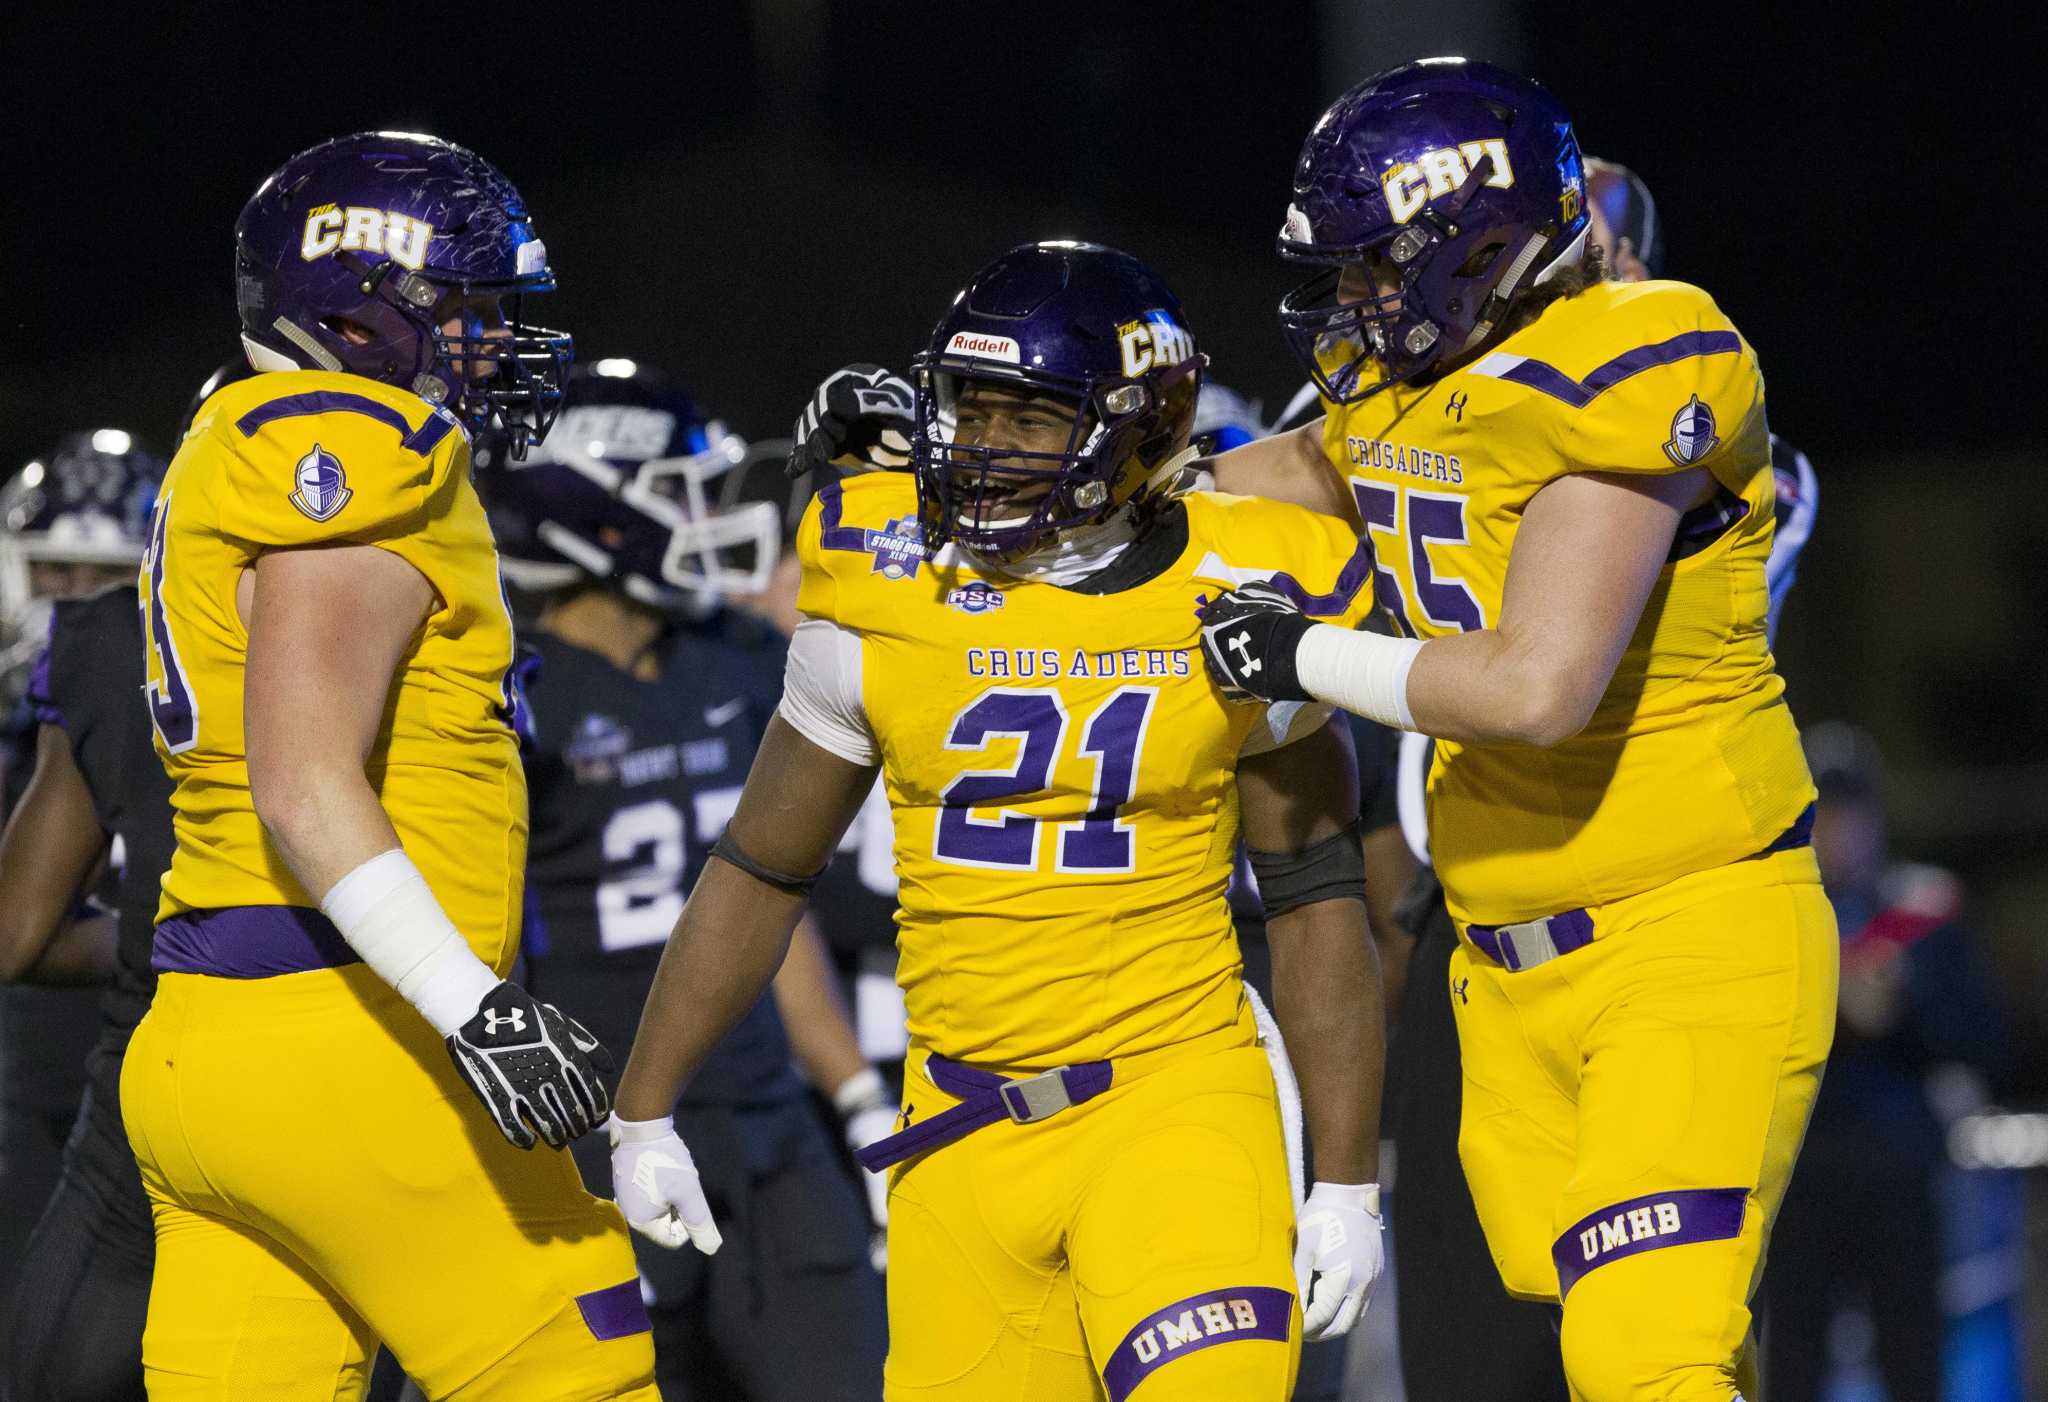 NCAA FOOTBALL UMHB wins Stagg Bowl over Mount Union